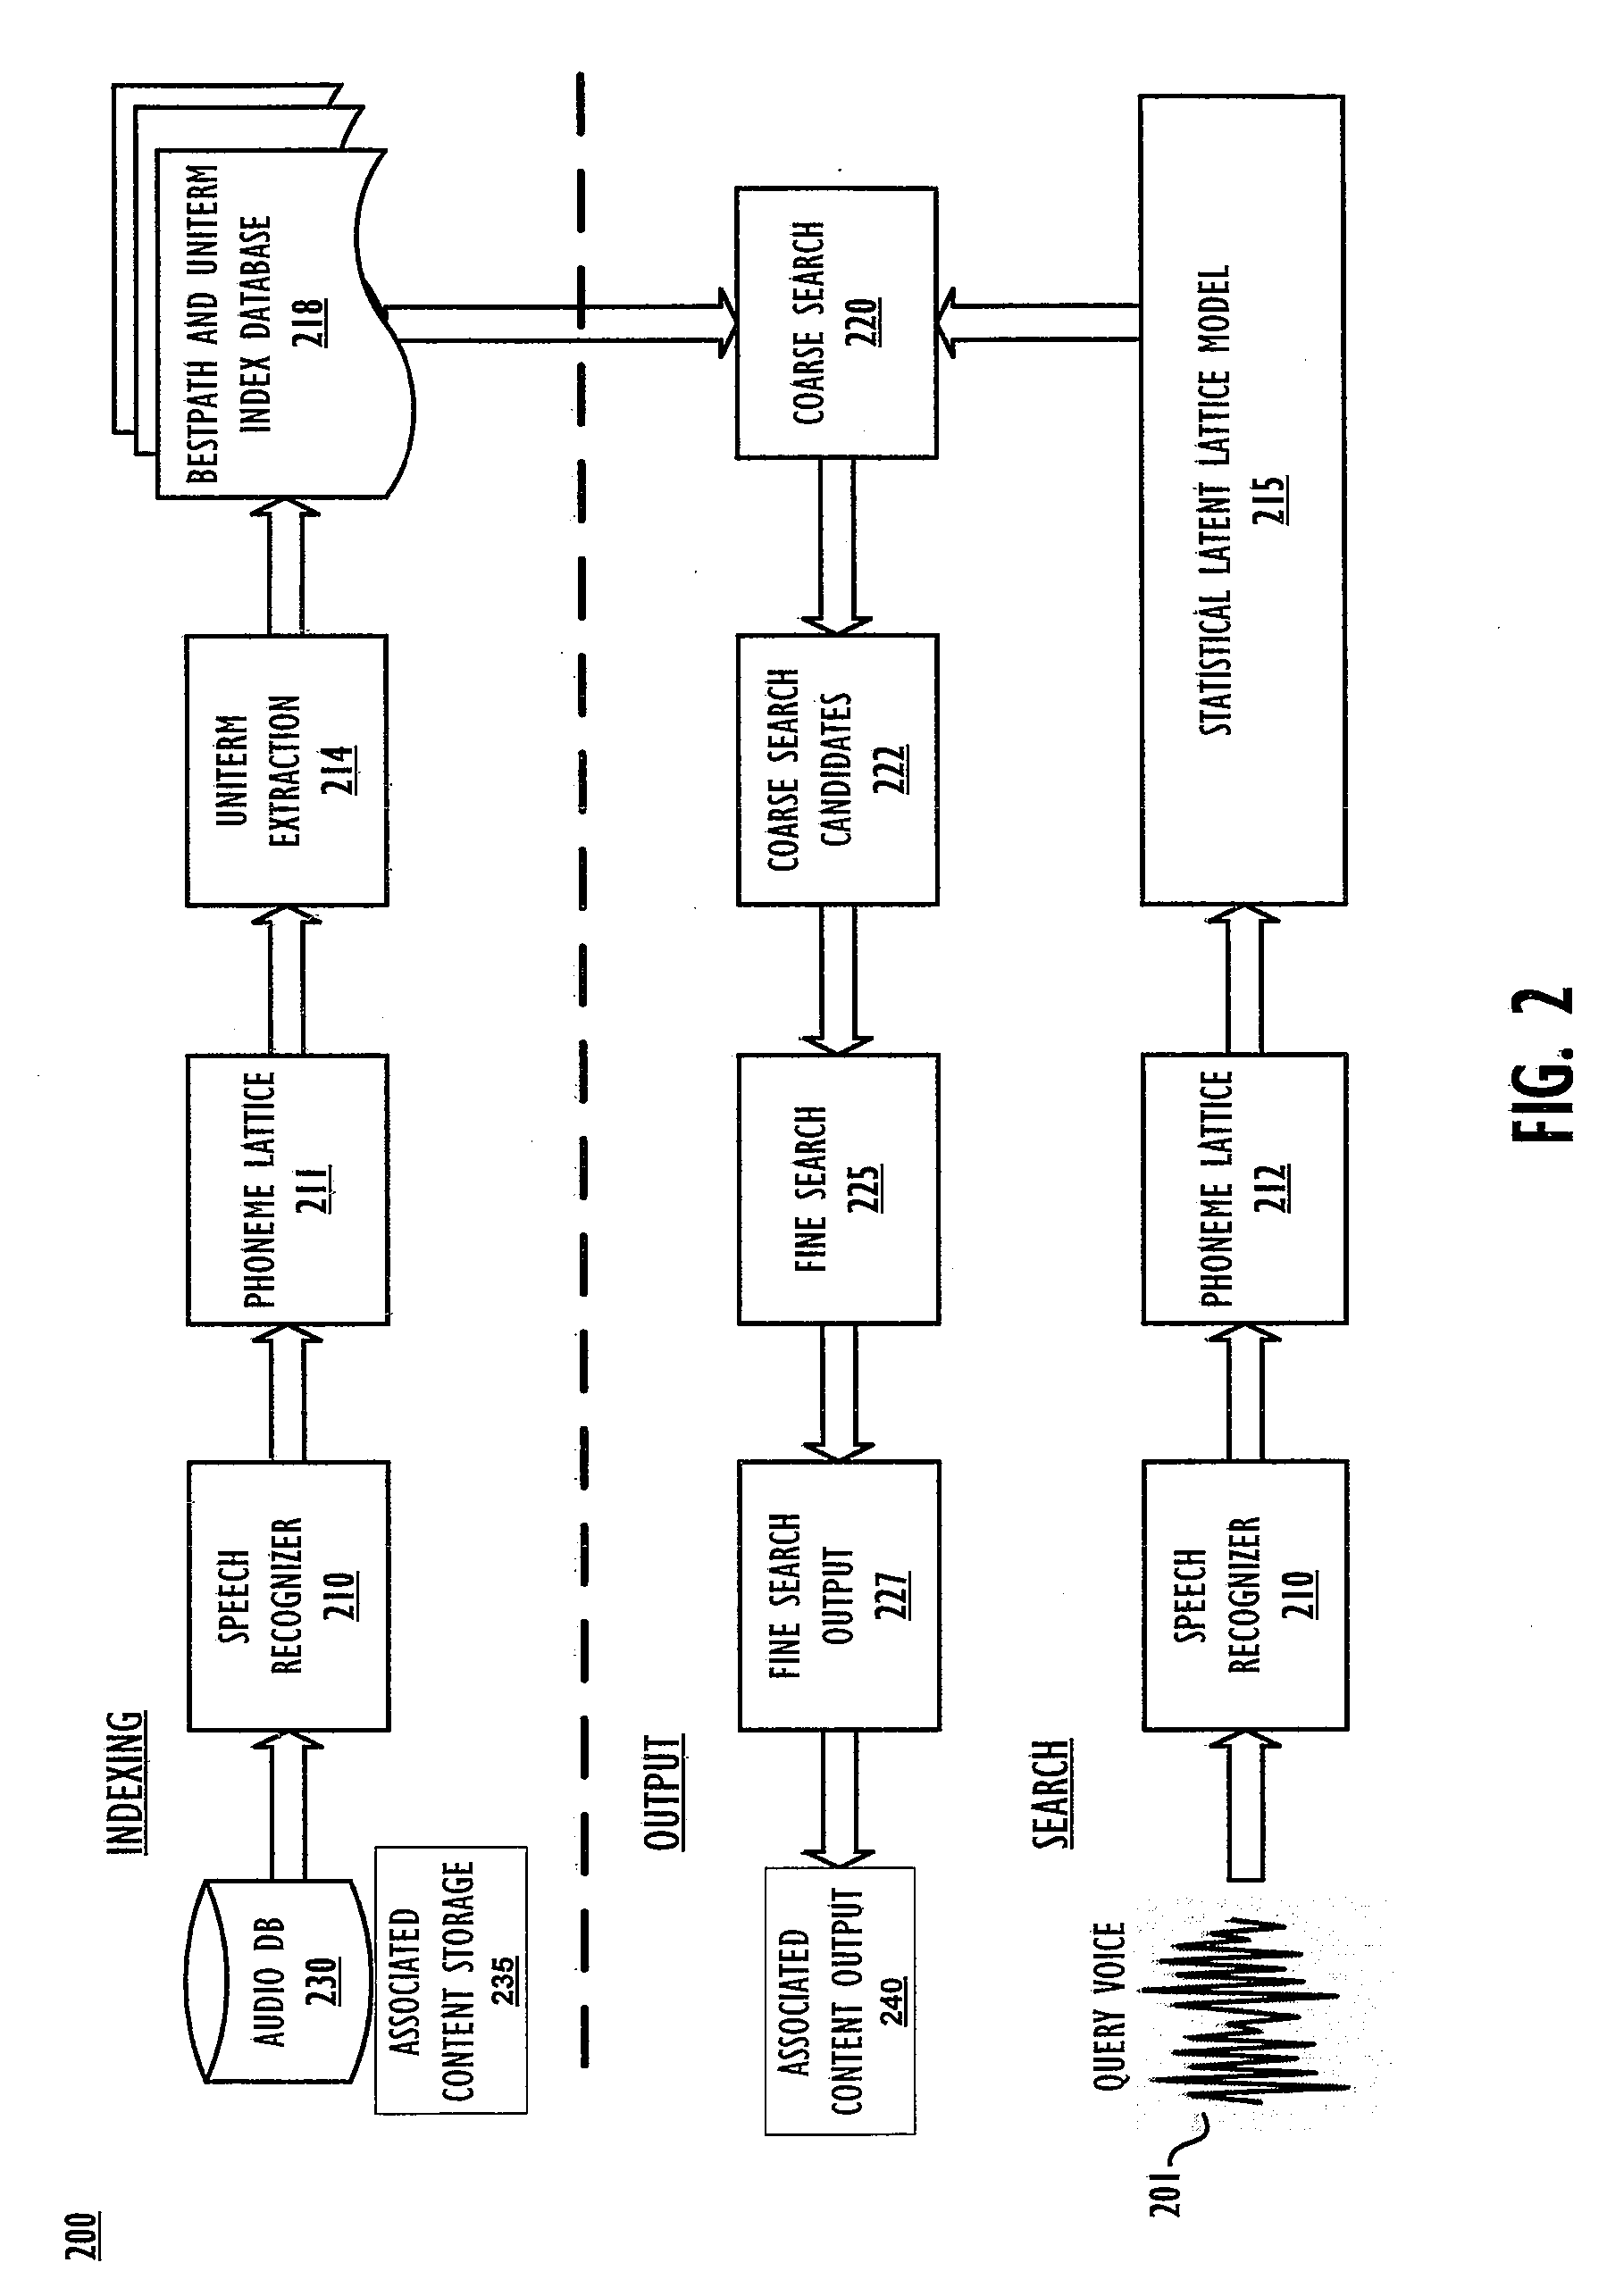 Method and Apparatus for Voice Searching for Stored Content Using Uniterm Discovery